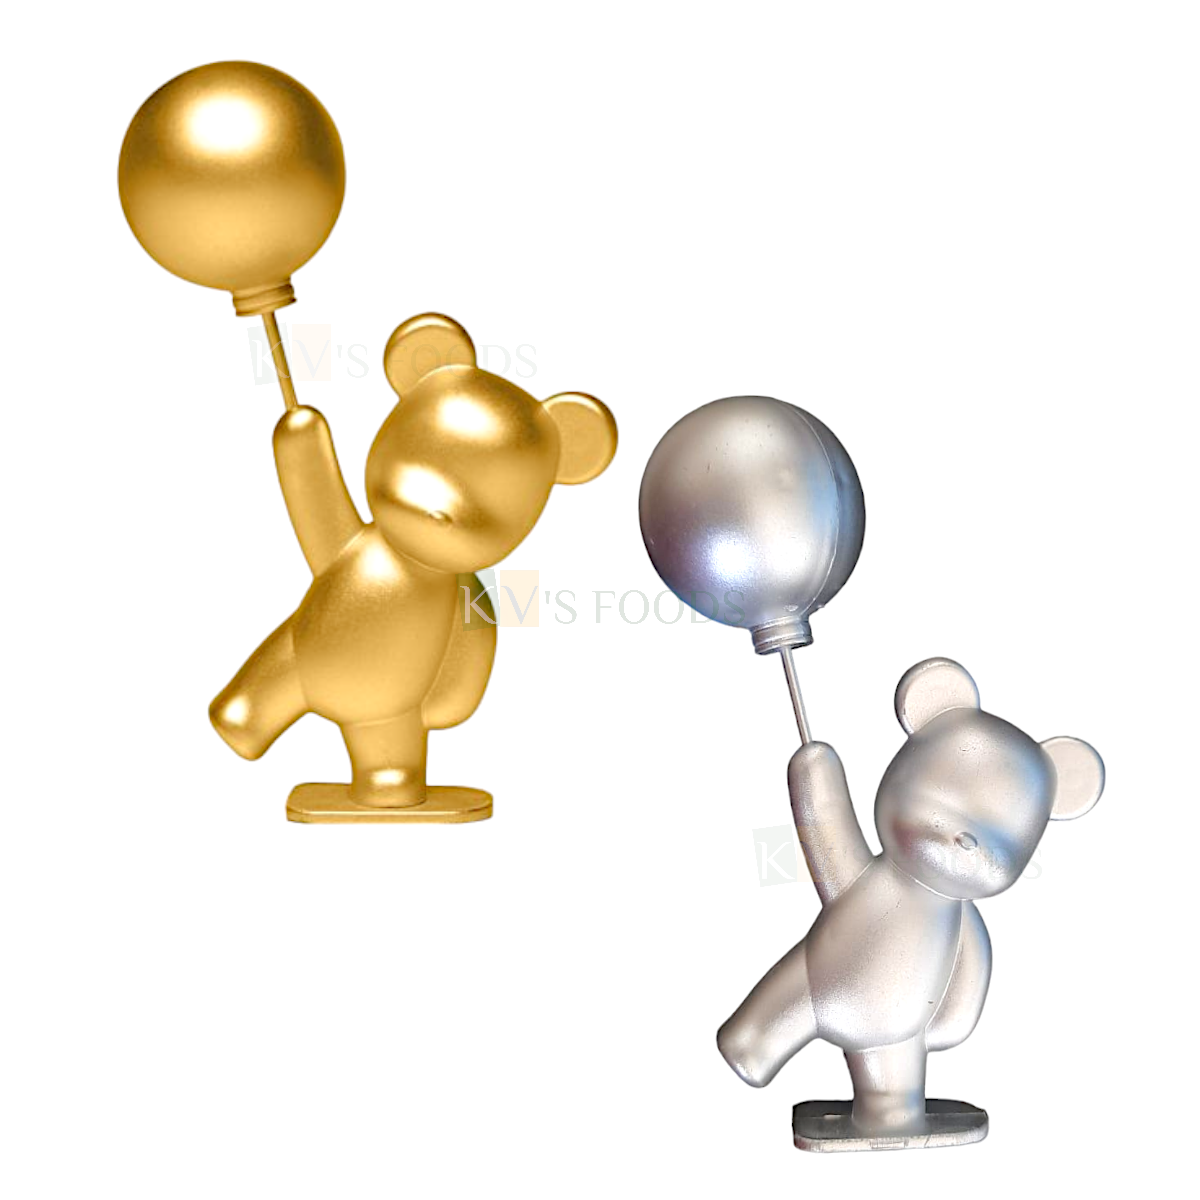 1PC Silver Golden Shiny Teddy Bear With Balloon Cake Topper Wedding Love Valentine Baby Shower Cake Topper, Miniature Figurine Happy Birthday Theme Kids Room Decor DIY Cake Decoration Gift Party Decor